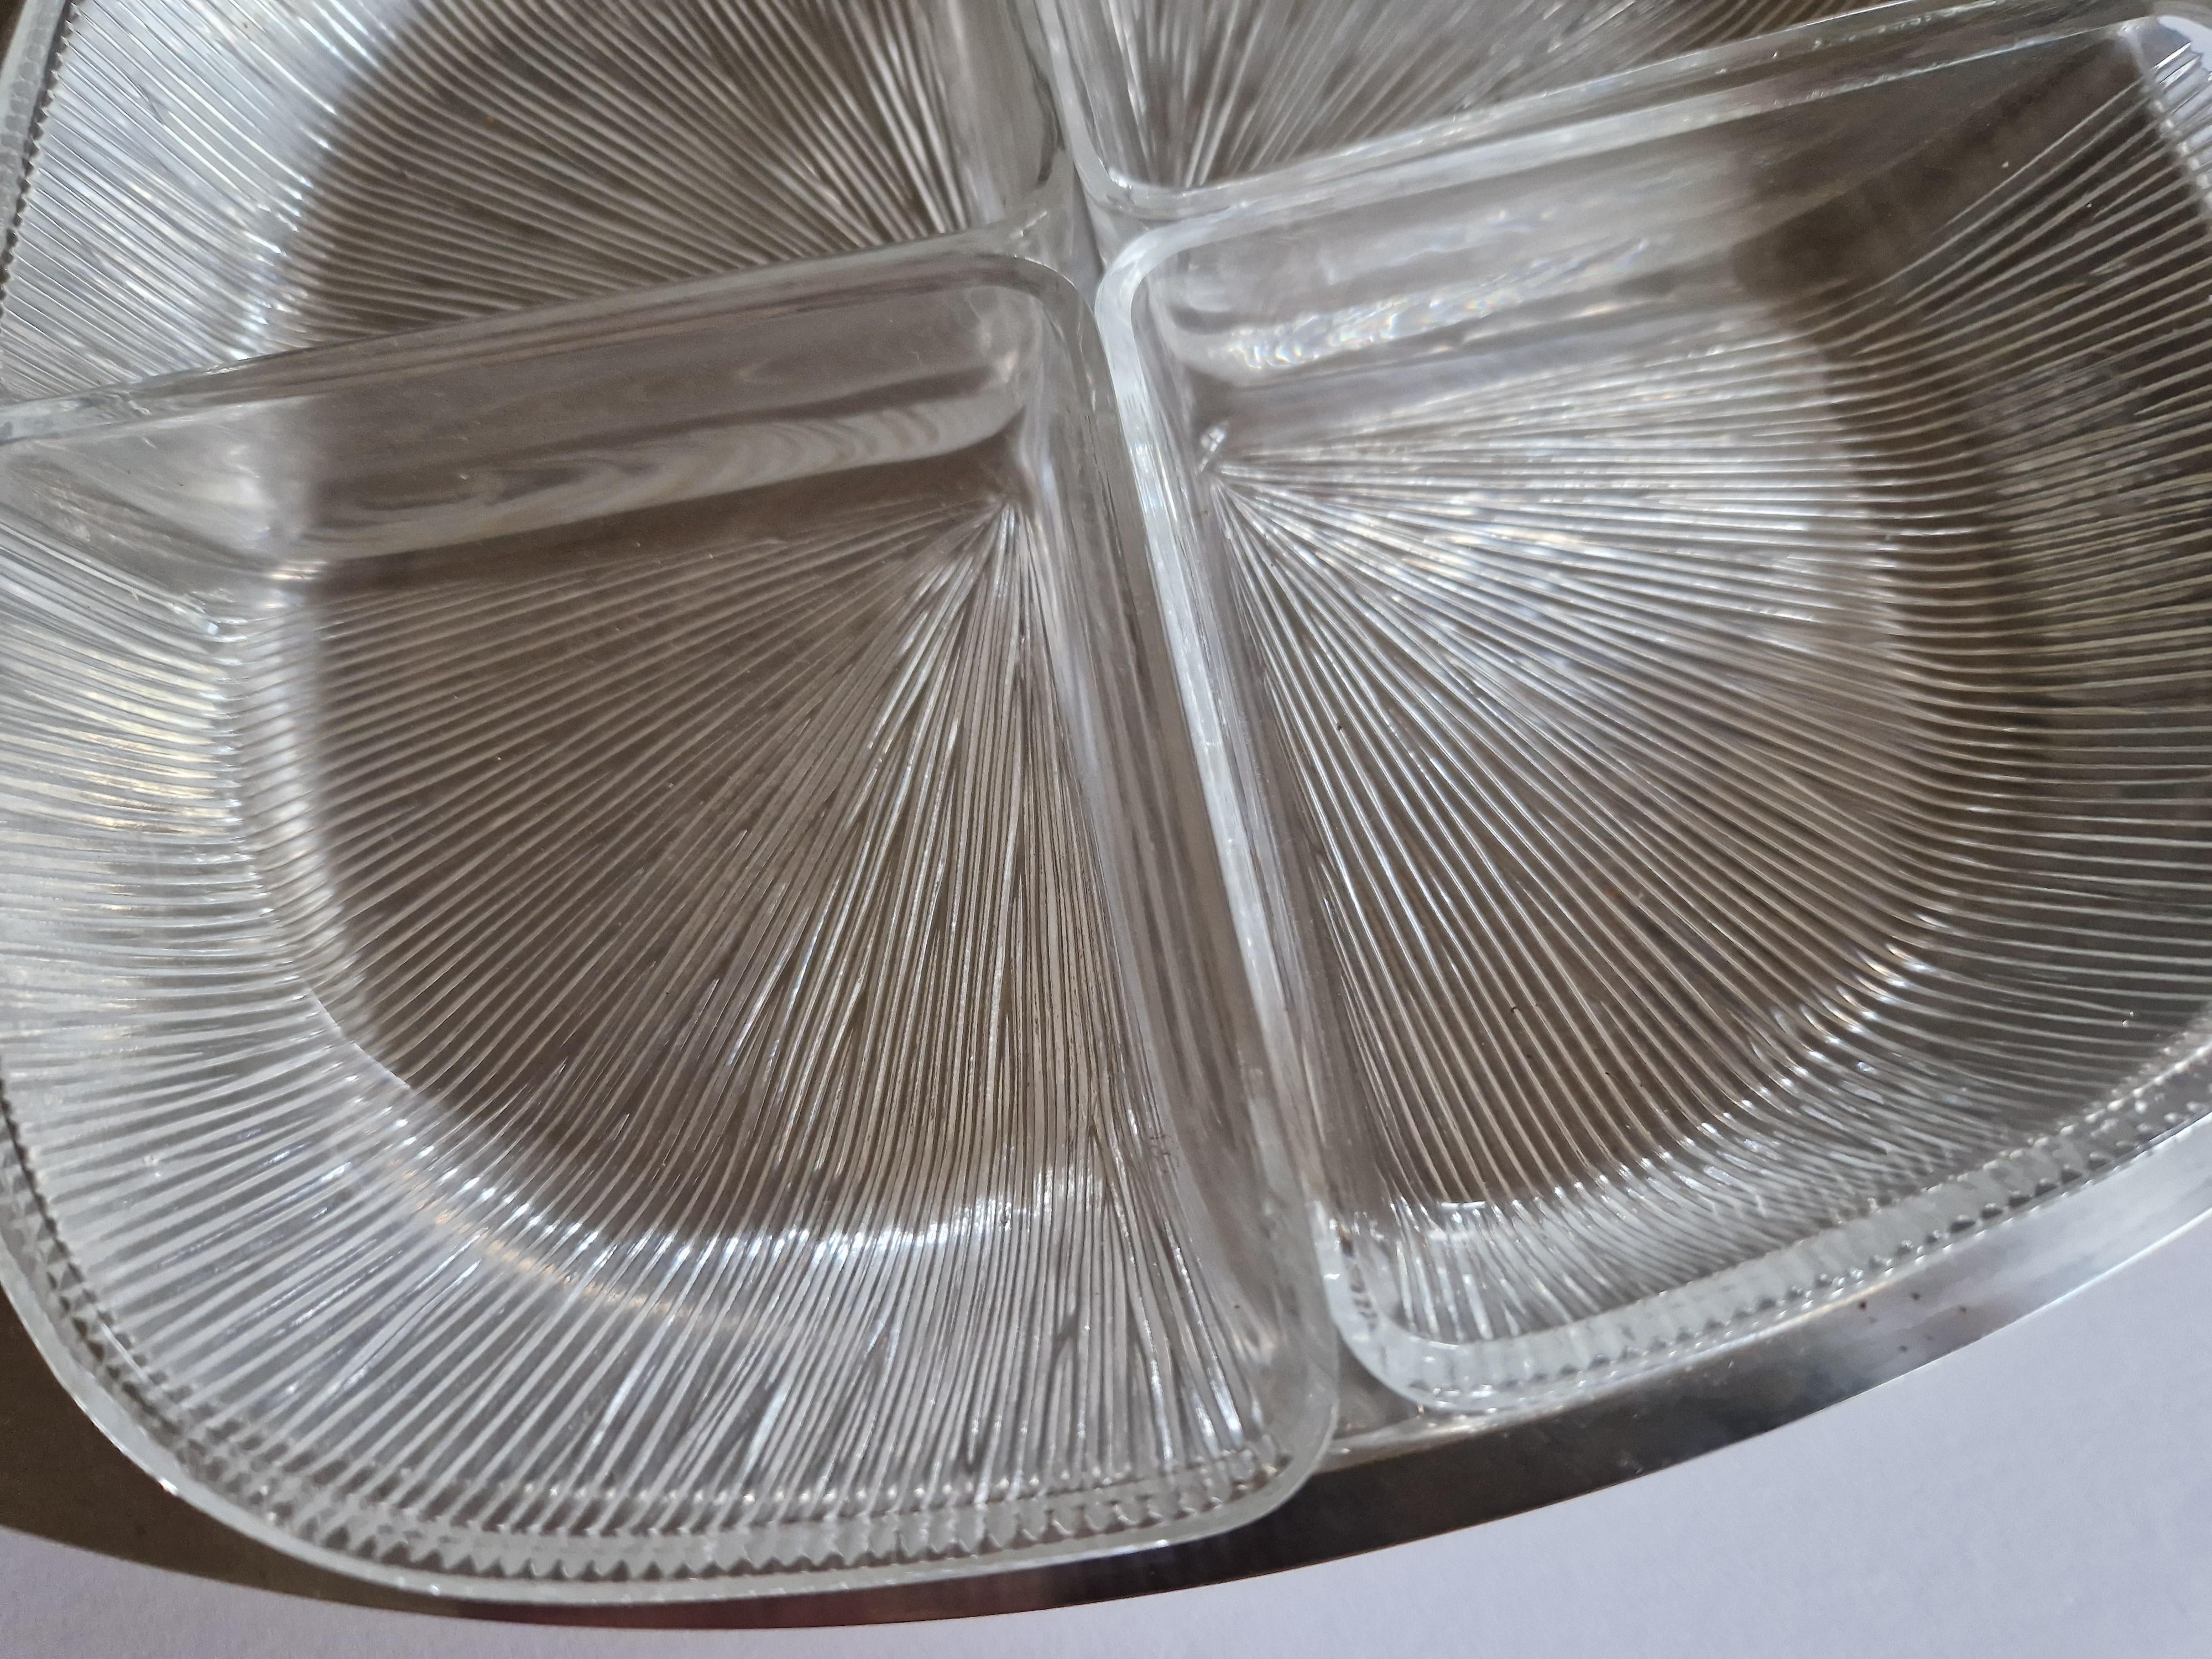 Midcentury Serving Plate Stainless Steel and Glass Cromargan, Germany, 1970s For Sale 1